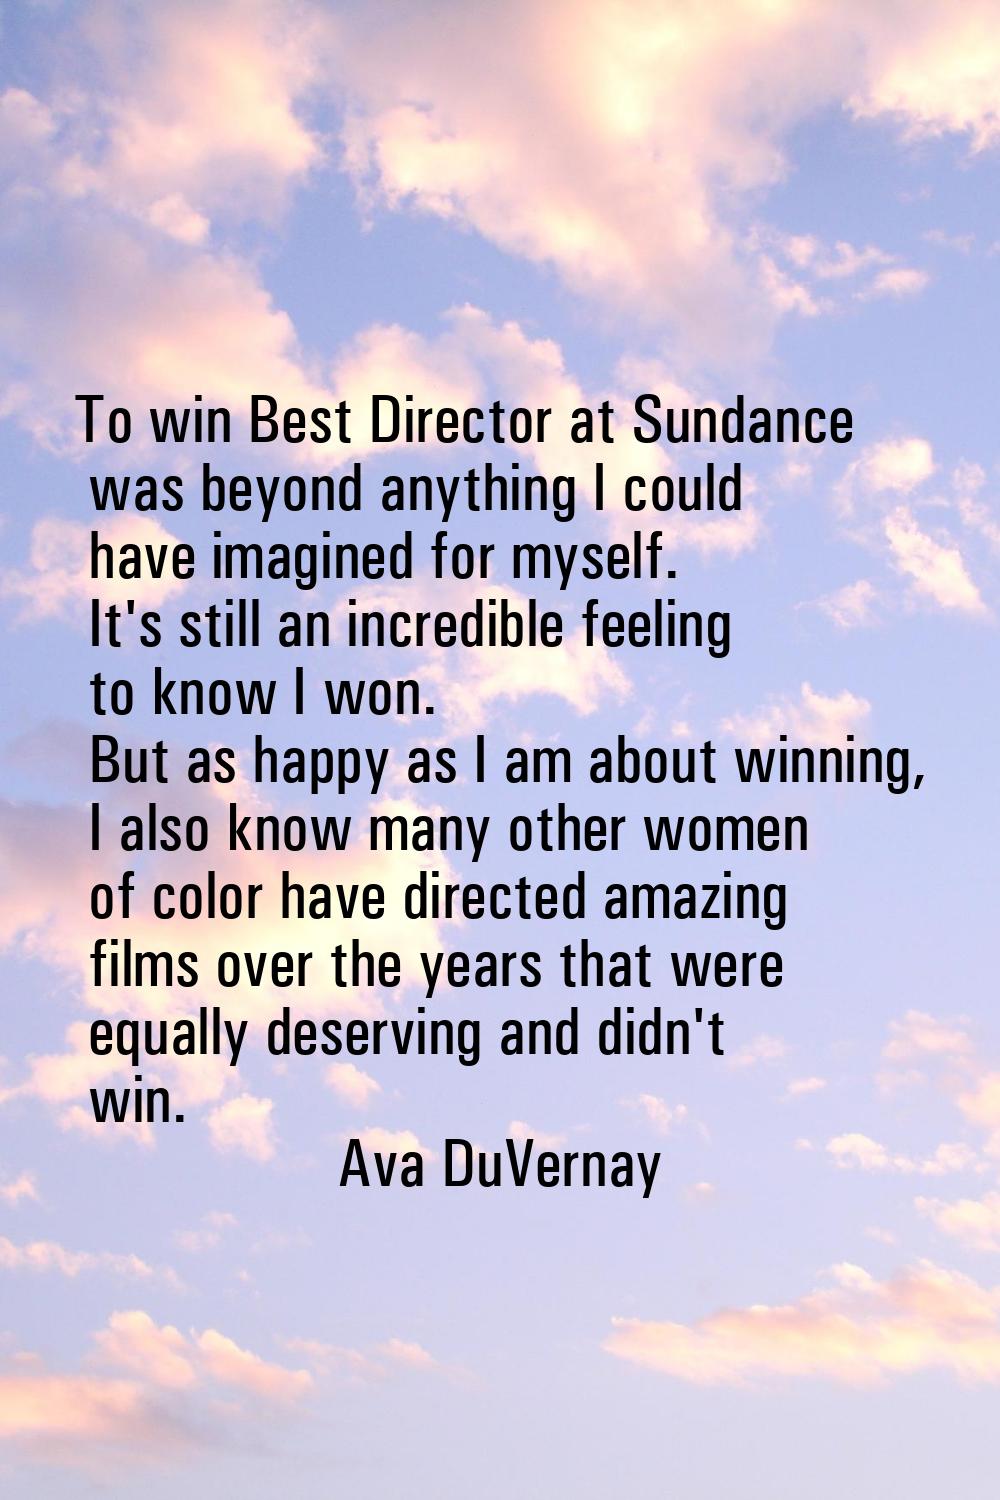 To win Best Director at Sundance was beyond anything I could have imagined for myself. It's still a